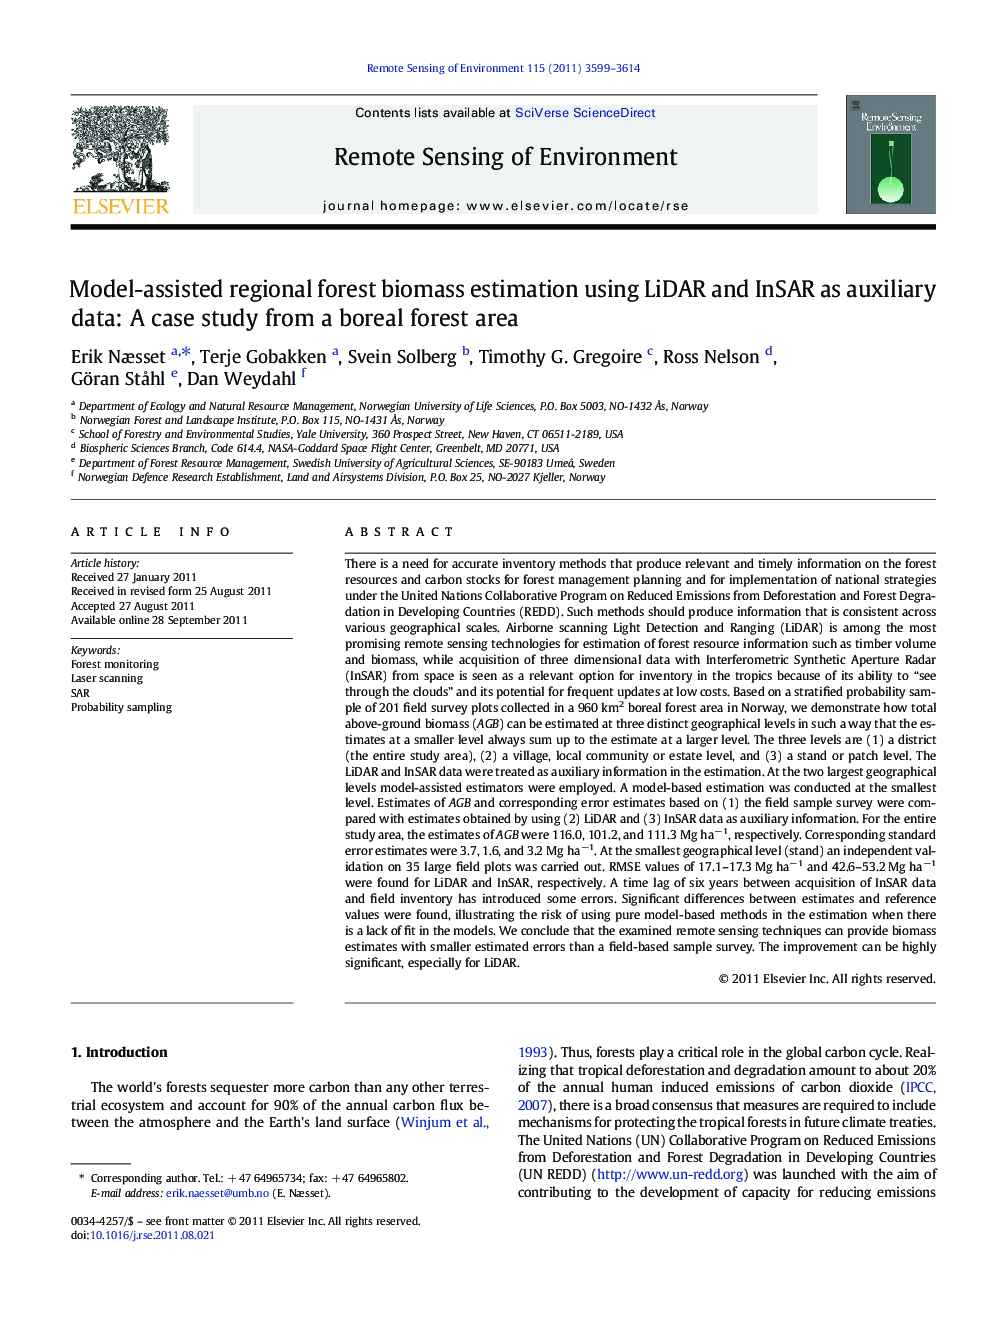 Model-assisted regional forest biomass estimation using LiDAR and InSAR as auxiliary data: A case study from a boreal forest area